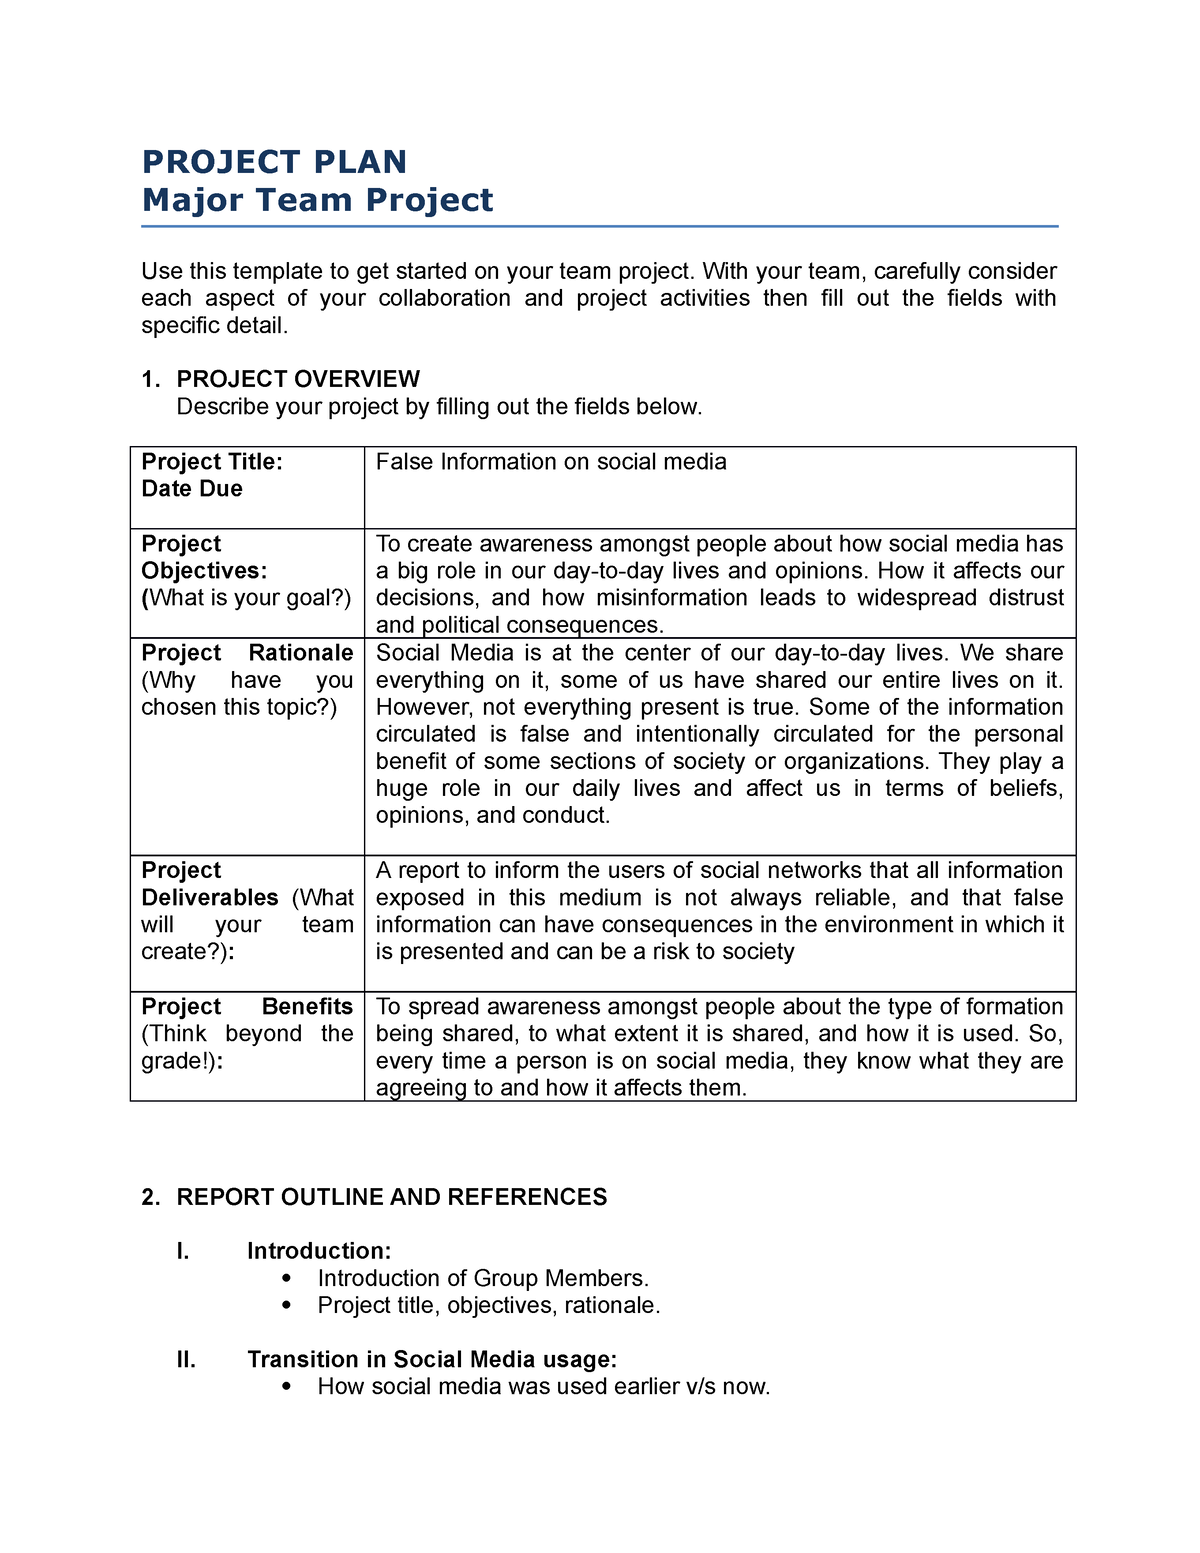 Project plan template draft - PROJECT PLAN Major Team Project Use this ...